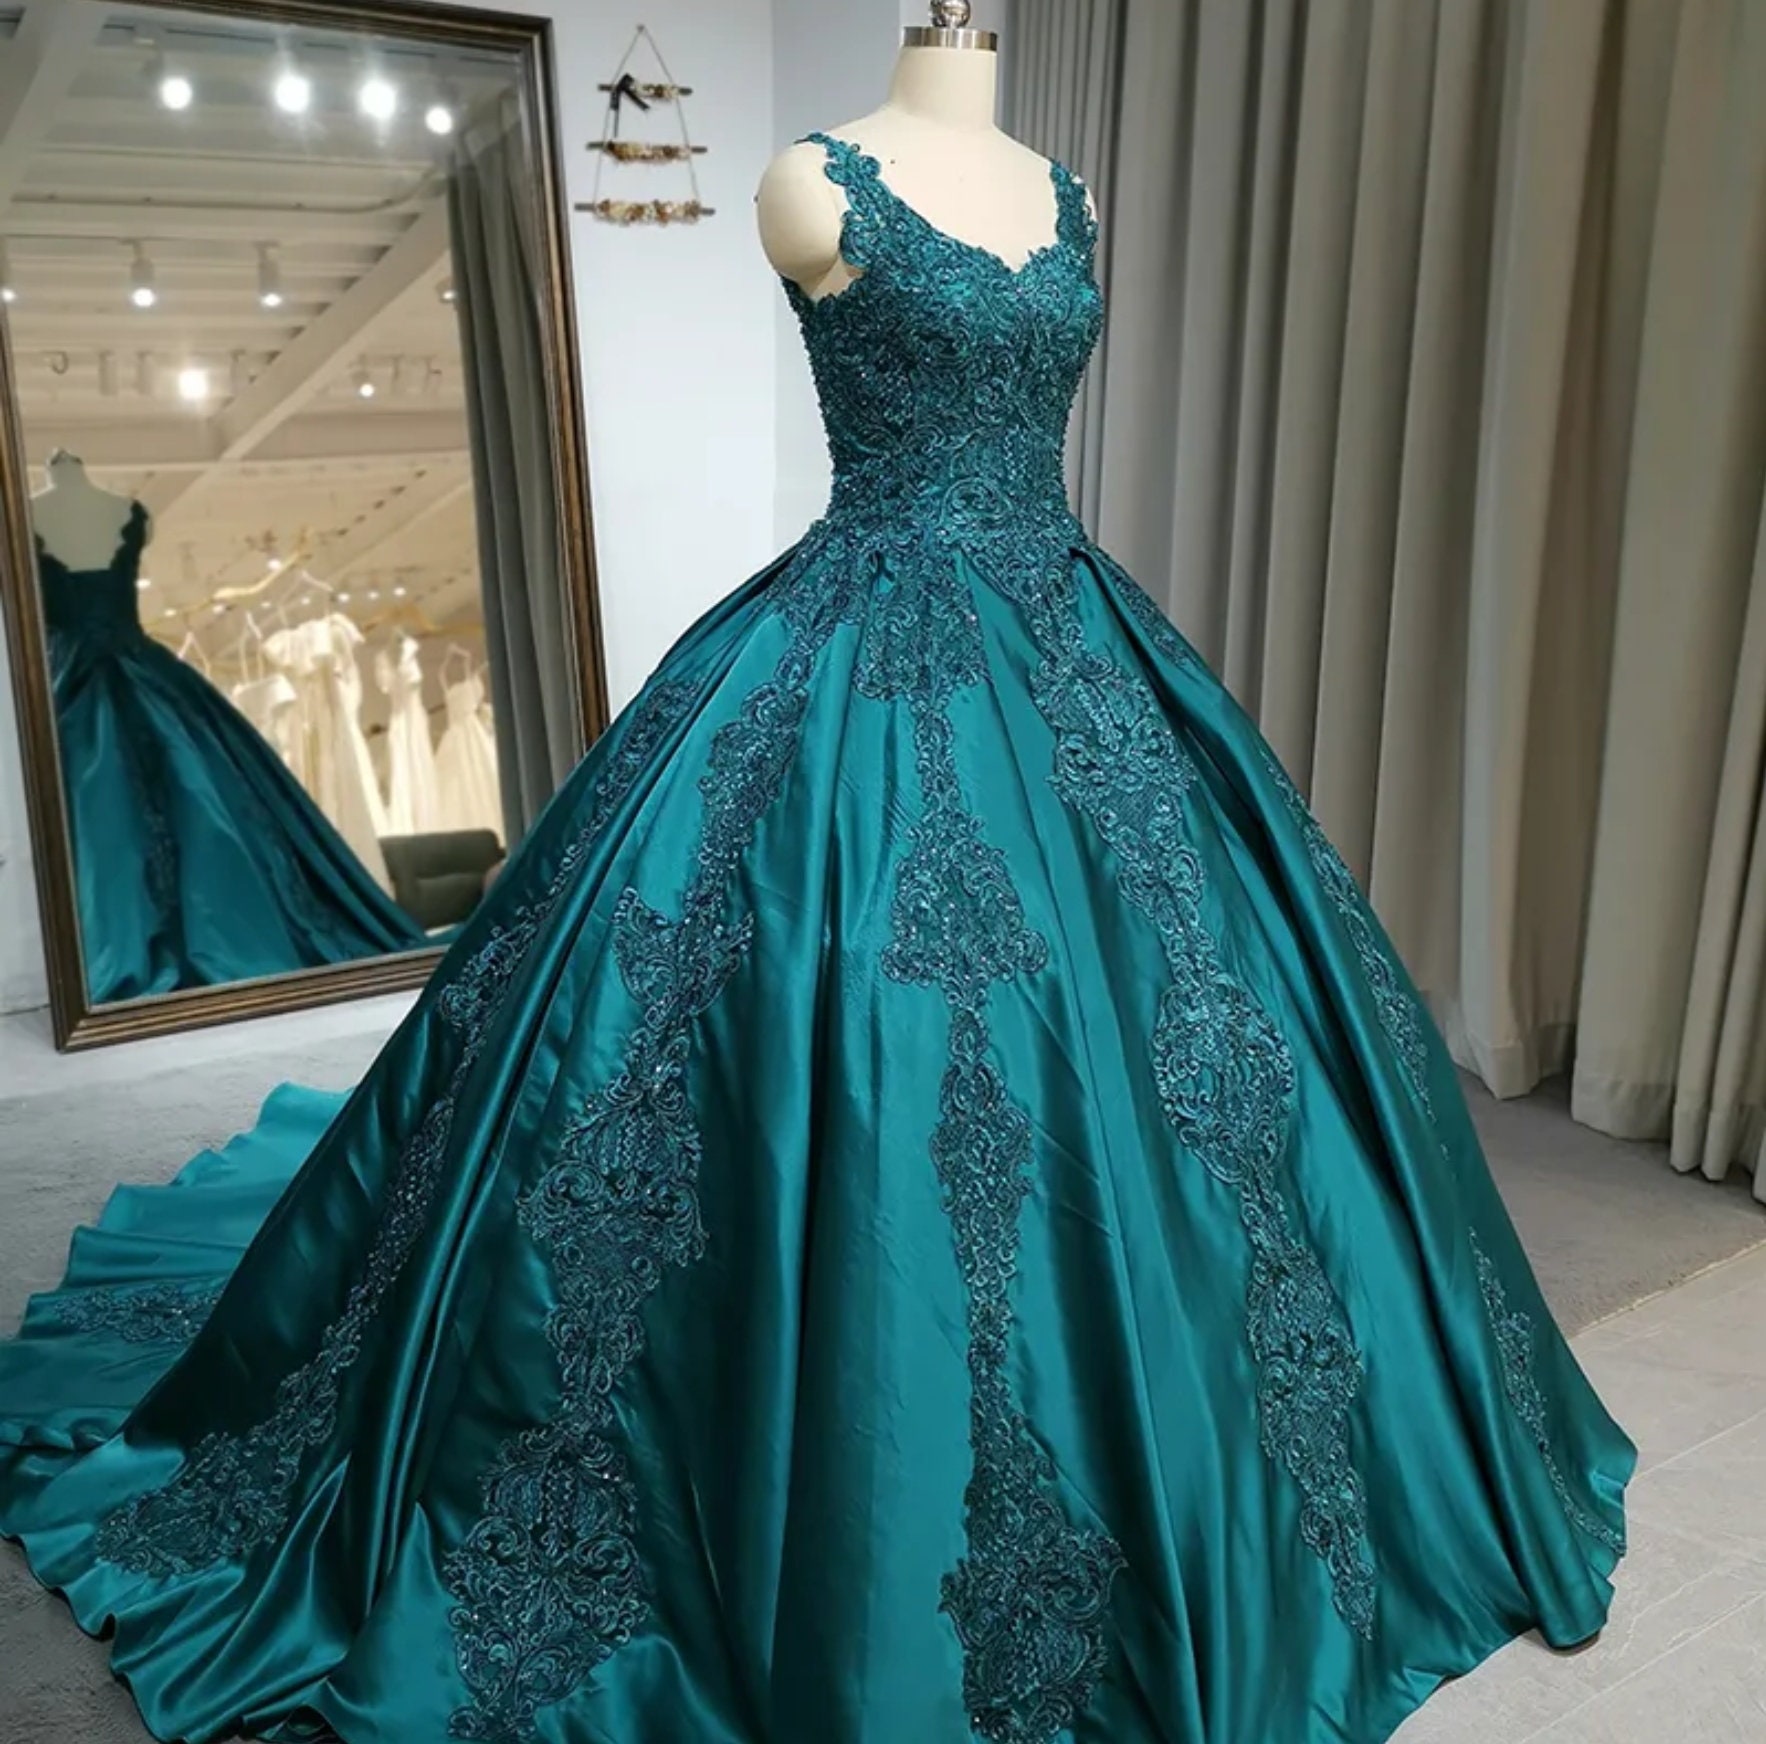 Blue 3D Floral Lace Sweetheart A-Line Prom Dress with Balloon